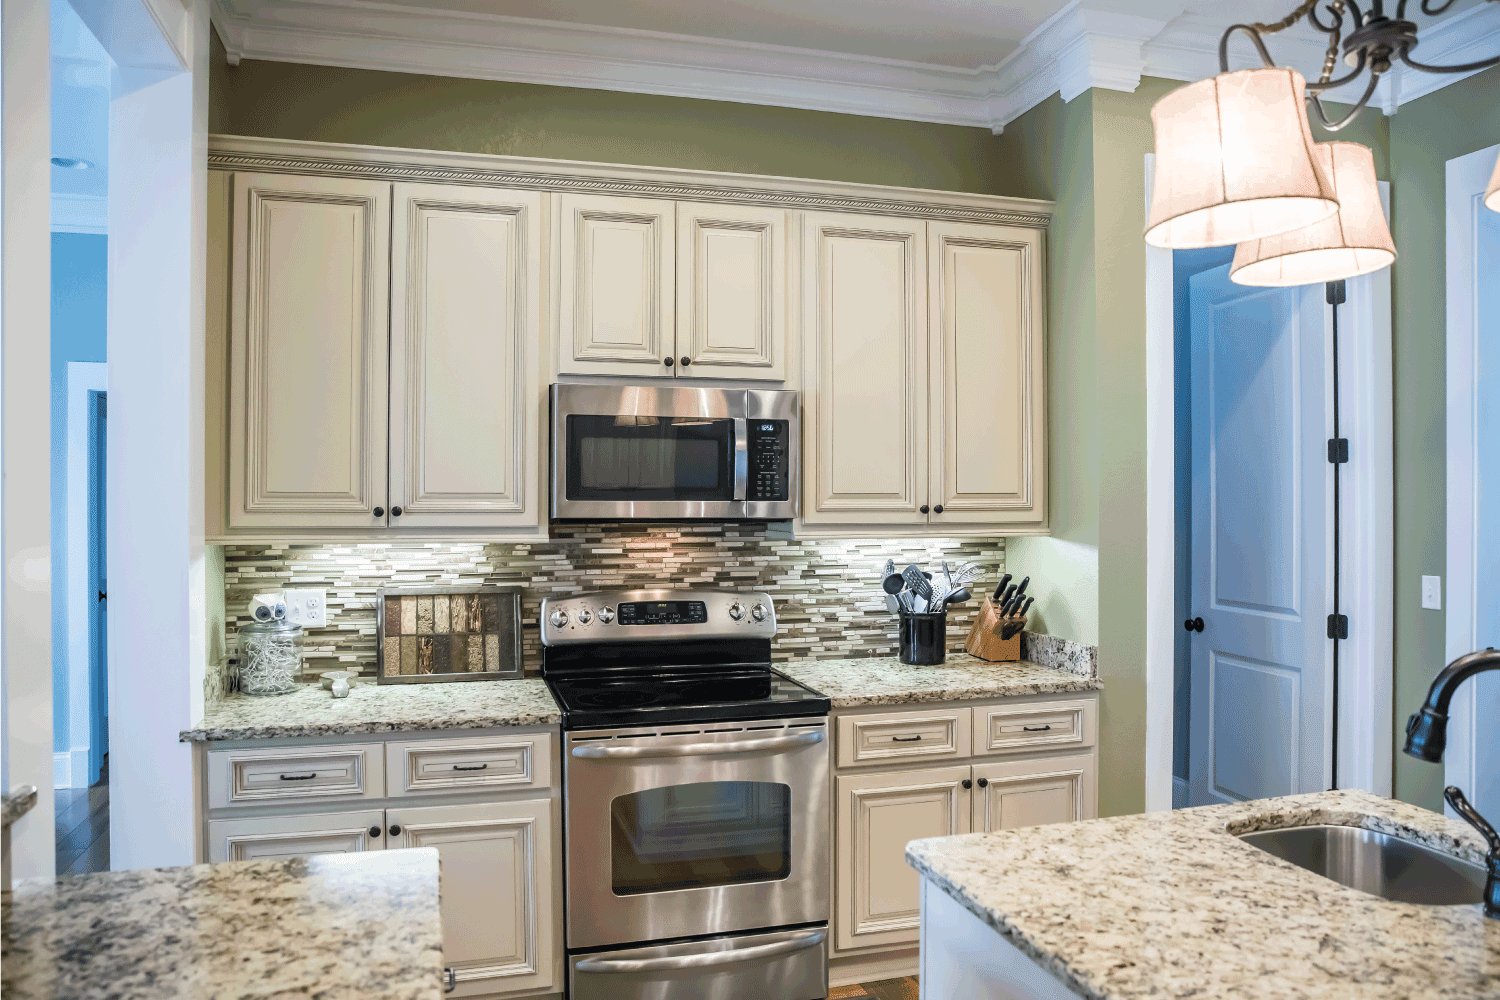 small appliance microwave in a green kitchen with cream colored cabinets in a new construction home with granite countertops and lots of cabinets and storage space